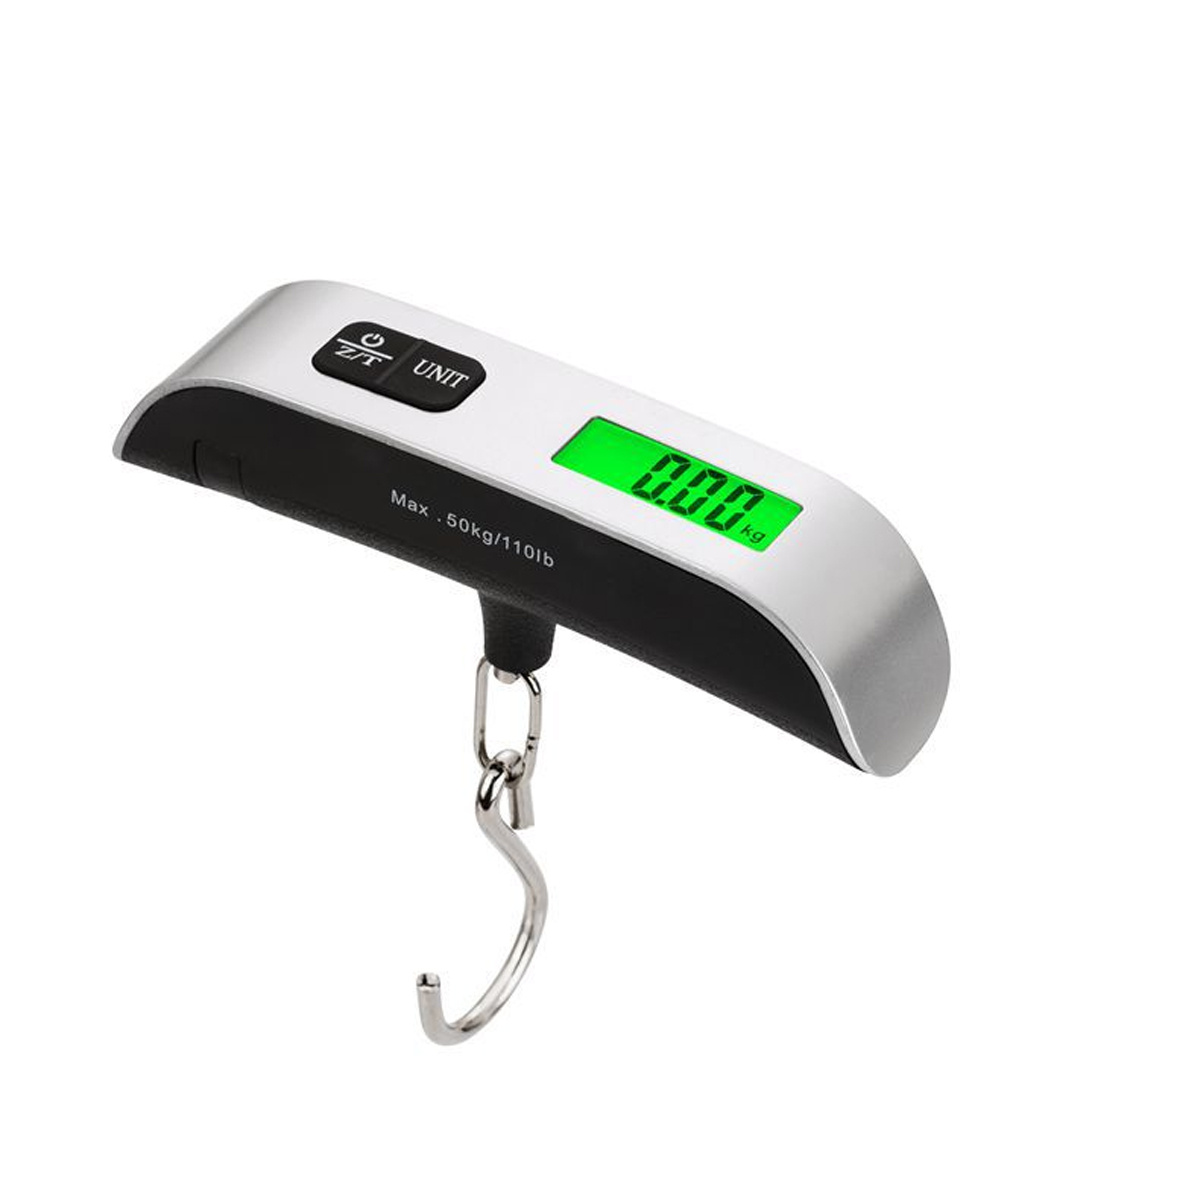 Electronic Luggage Scale Portable Digital Scale Max 50kg/110lb